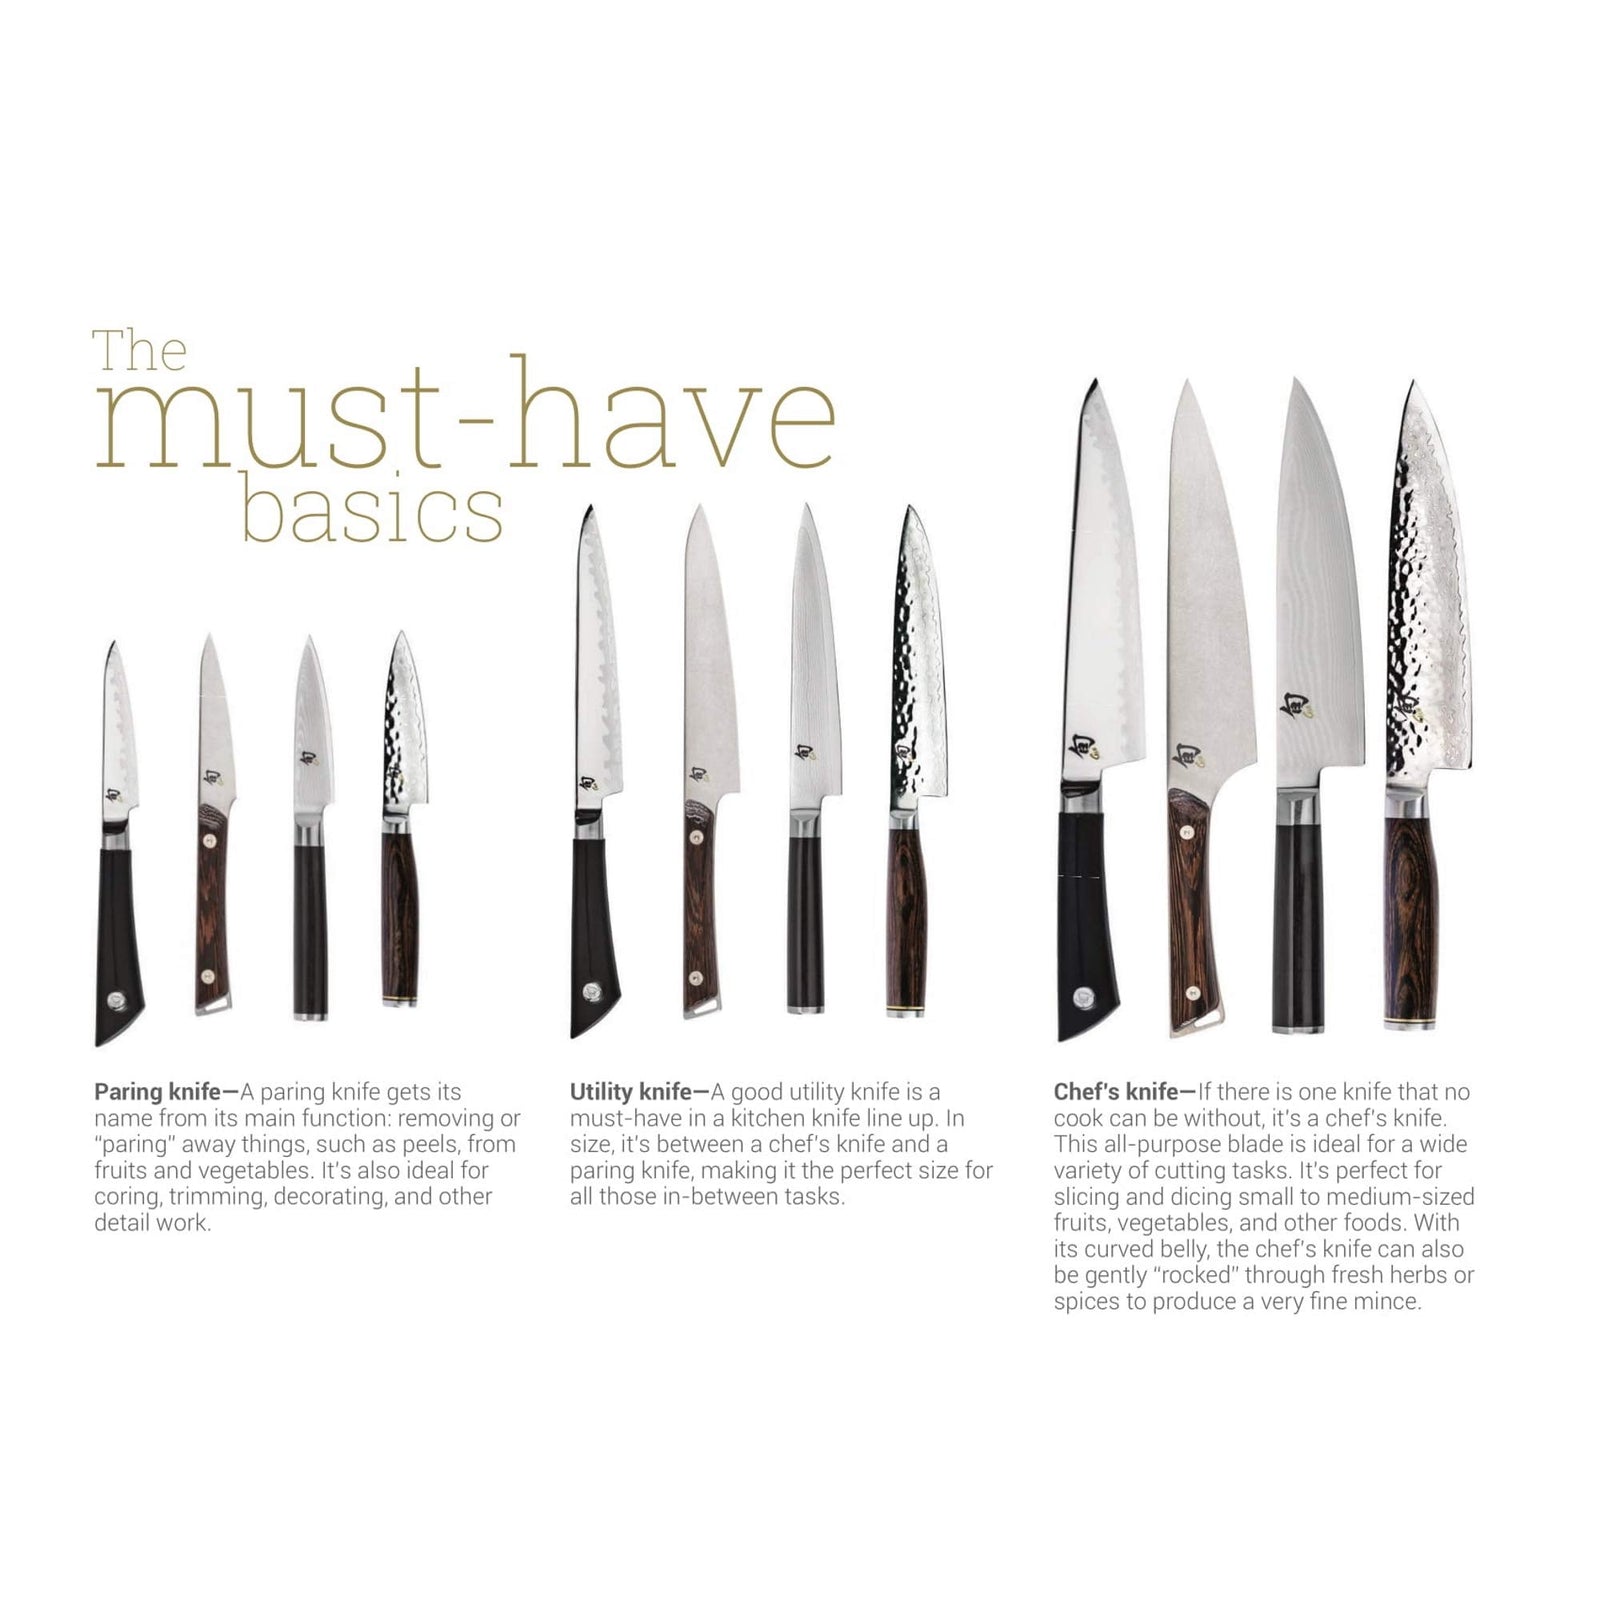 A knife for every cutting task